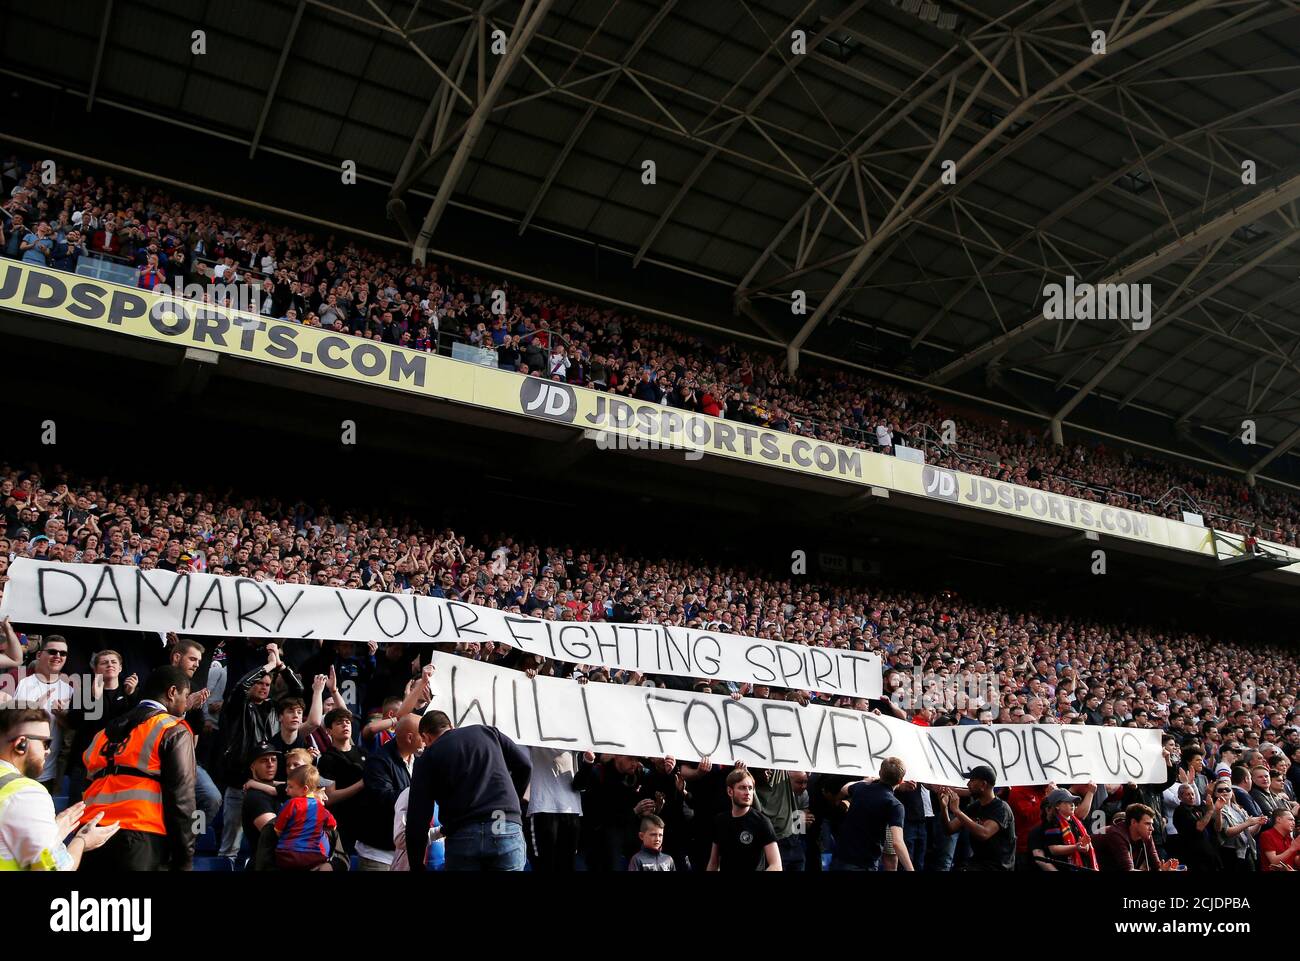 Soccer Football - Premier League - Crystal Palace v Huddersfield Town - Selhurst Park, London, Britain - March 30, 2019  Fans inside the stadium hold banners in memory of Damary Dawkins during the match     Action Images via Reuters/Andrew Couldridge  EDITORIAL USE ONLY. No use with unauthorized audio, video, data, fixture lists, club/league logos or 'live' services. Online in-match use limited to 75 images, no video emulation. No use in betting, games or single club/league/player publications.  Please contact your account representative for further details. Stock Photo